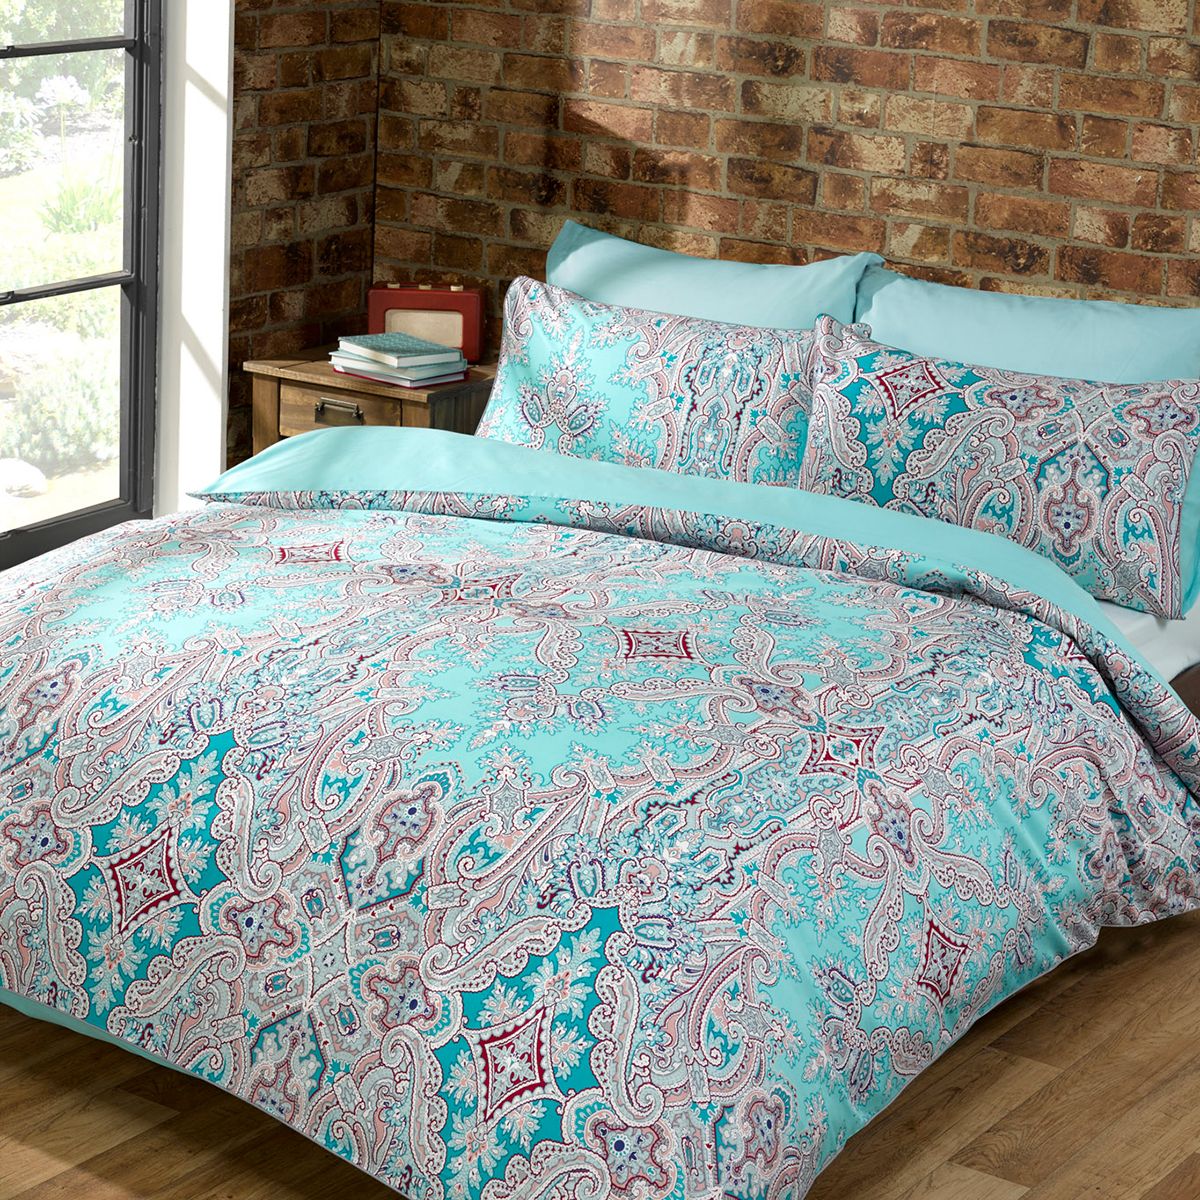 Carolyn Donnelly Eclectic Tamar Duvet Dunnes Stores Pickture